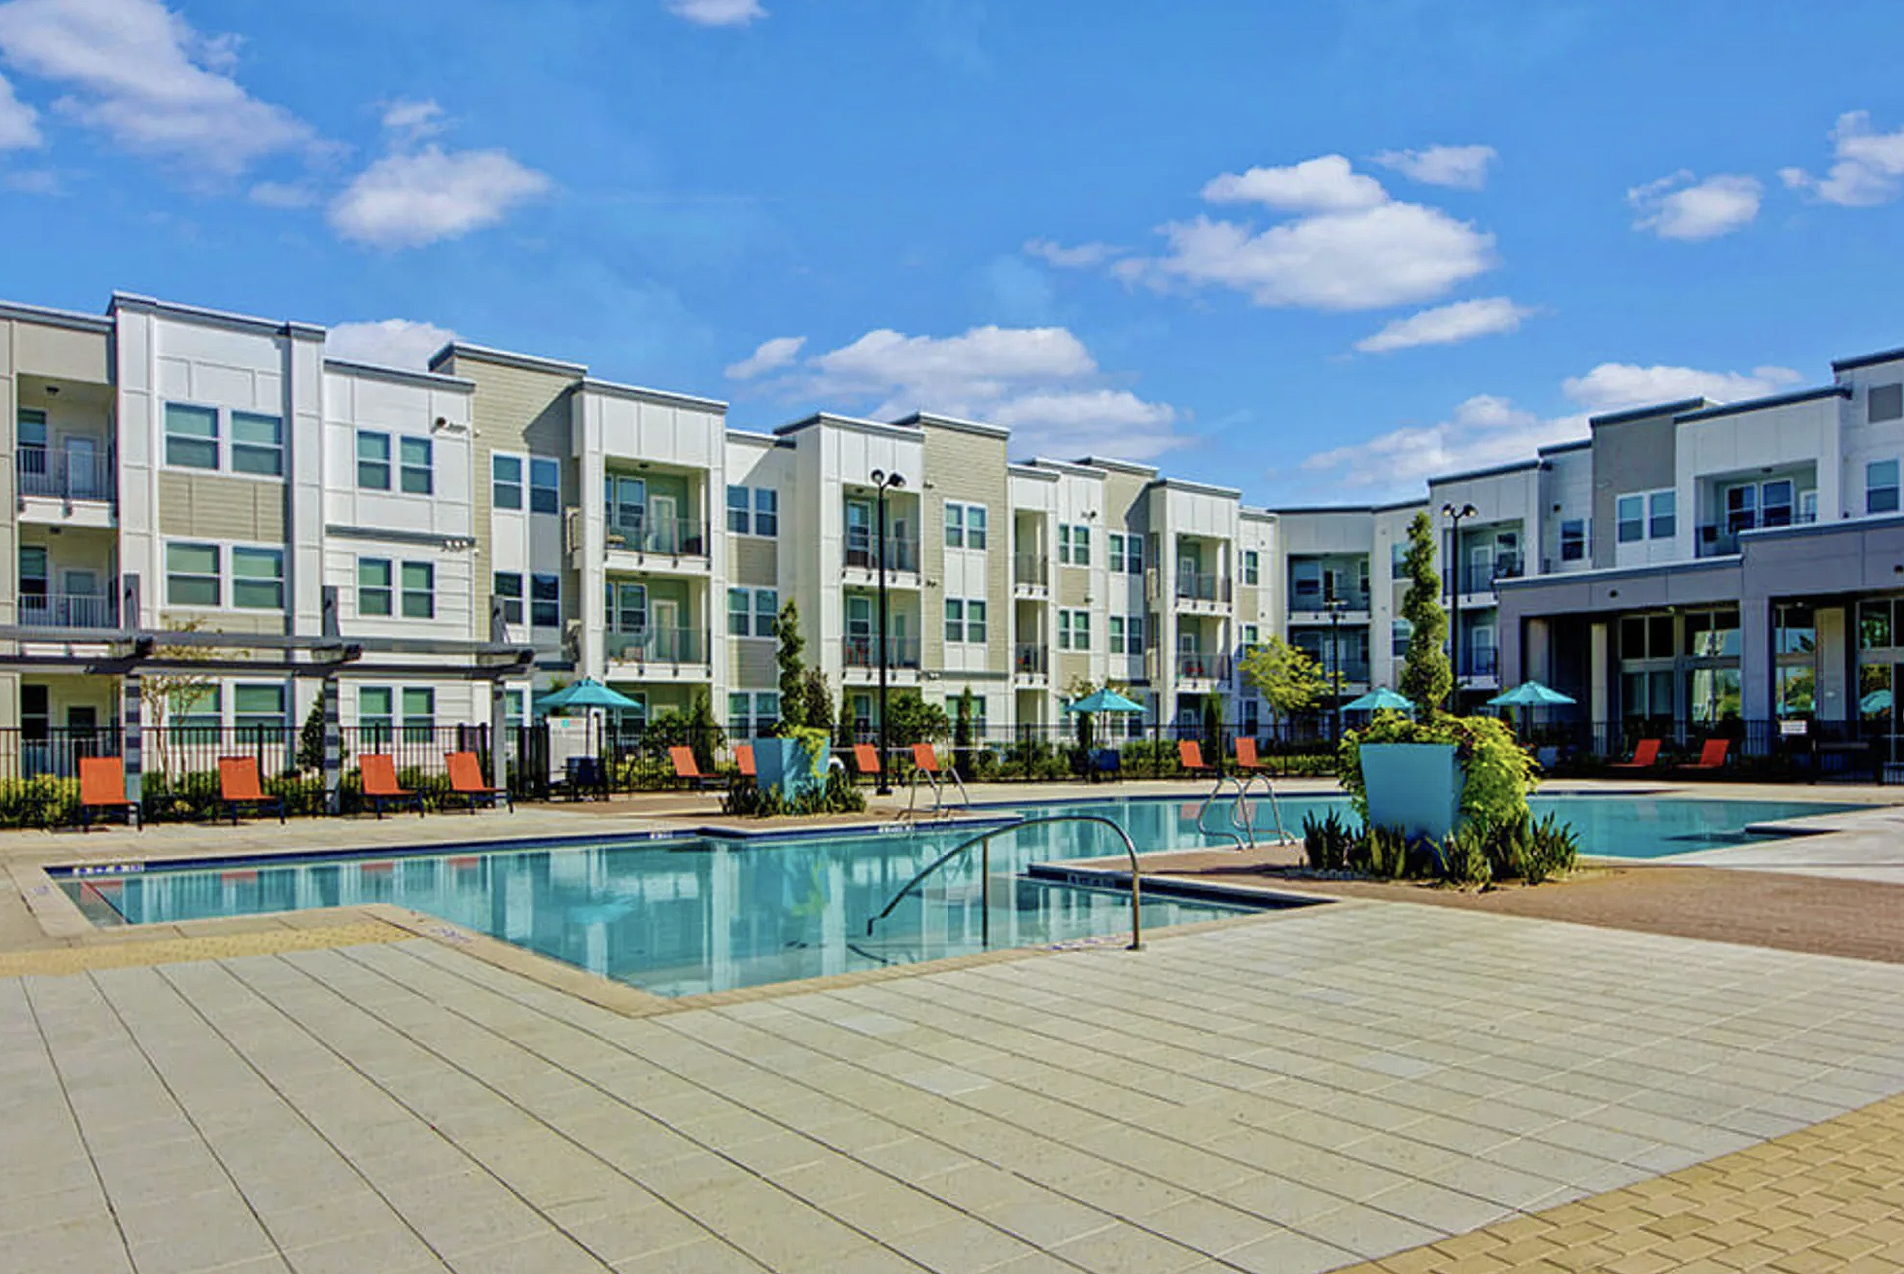 Avison Young completes $63.5 million acquisition of a 234-unit apartment property in Orlando, FL